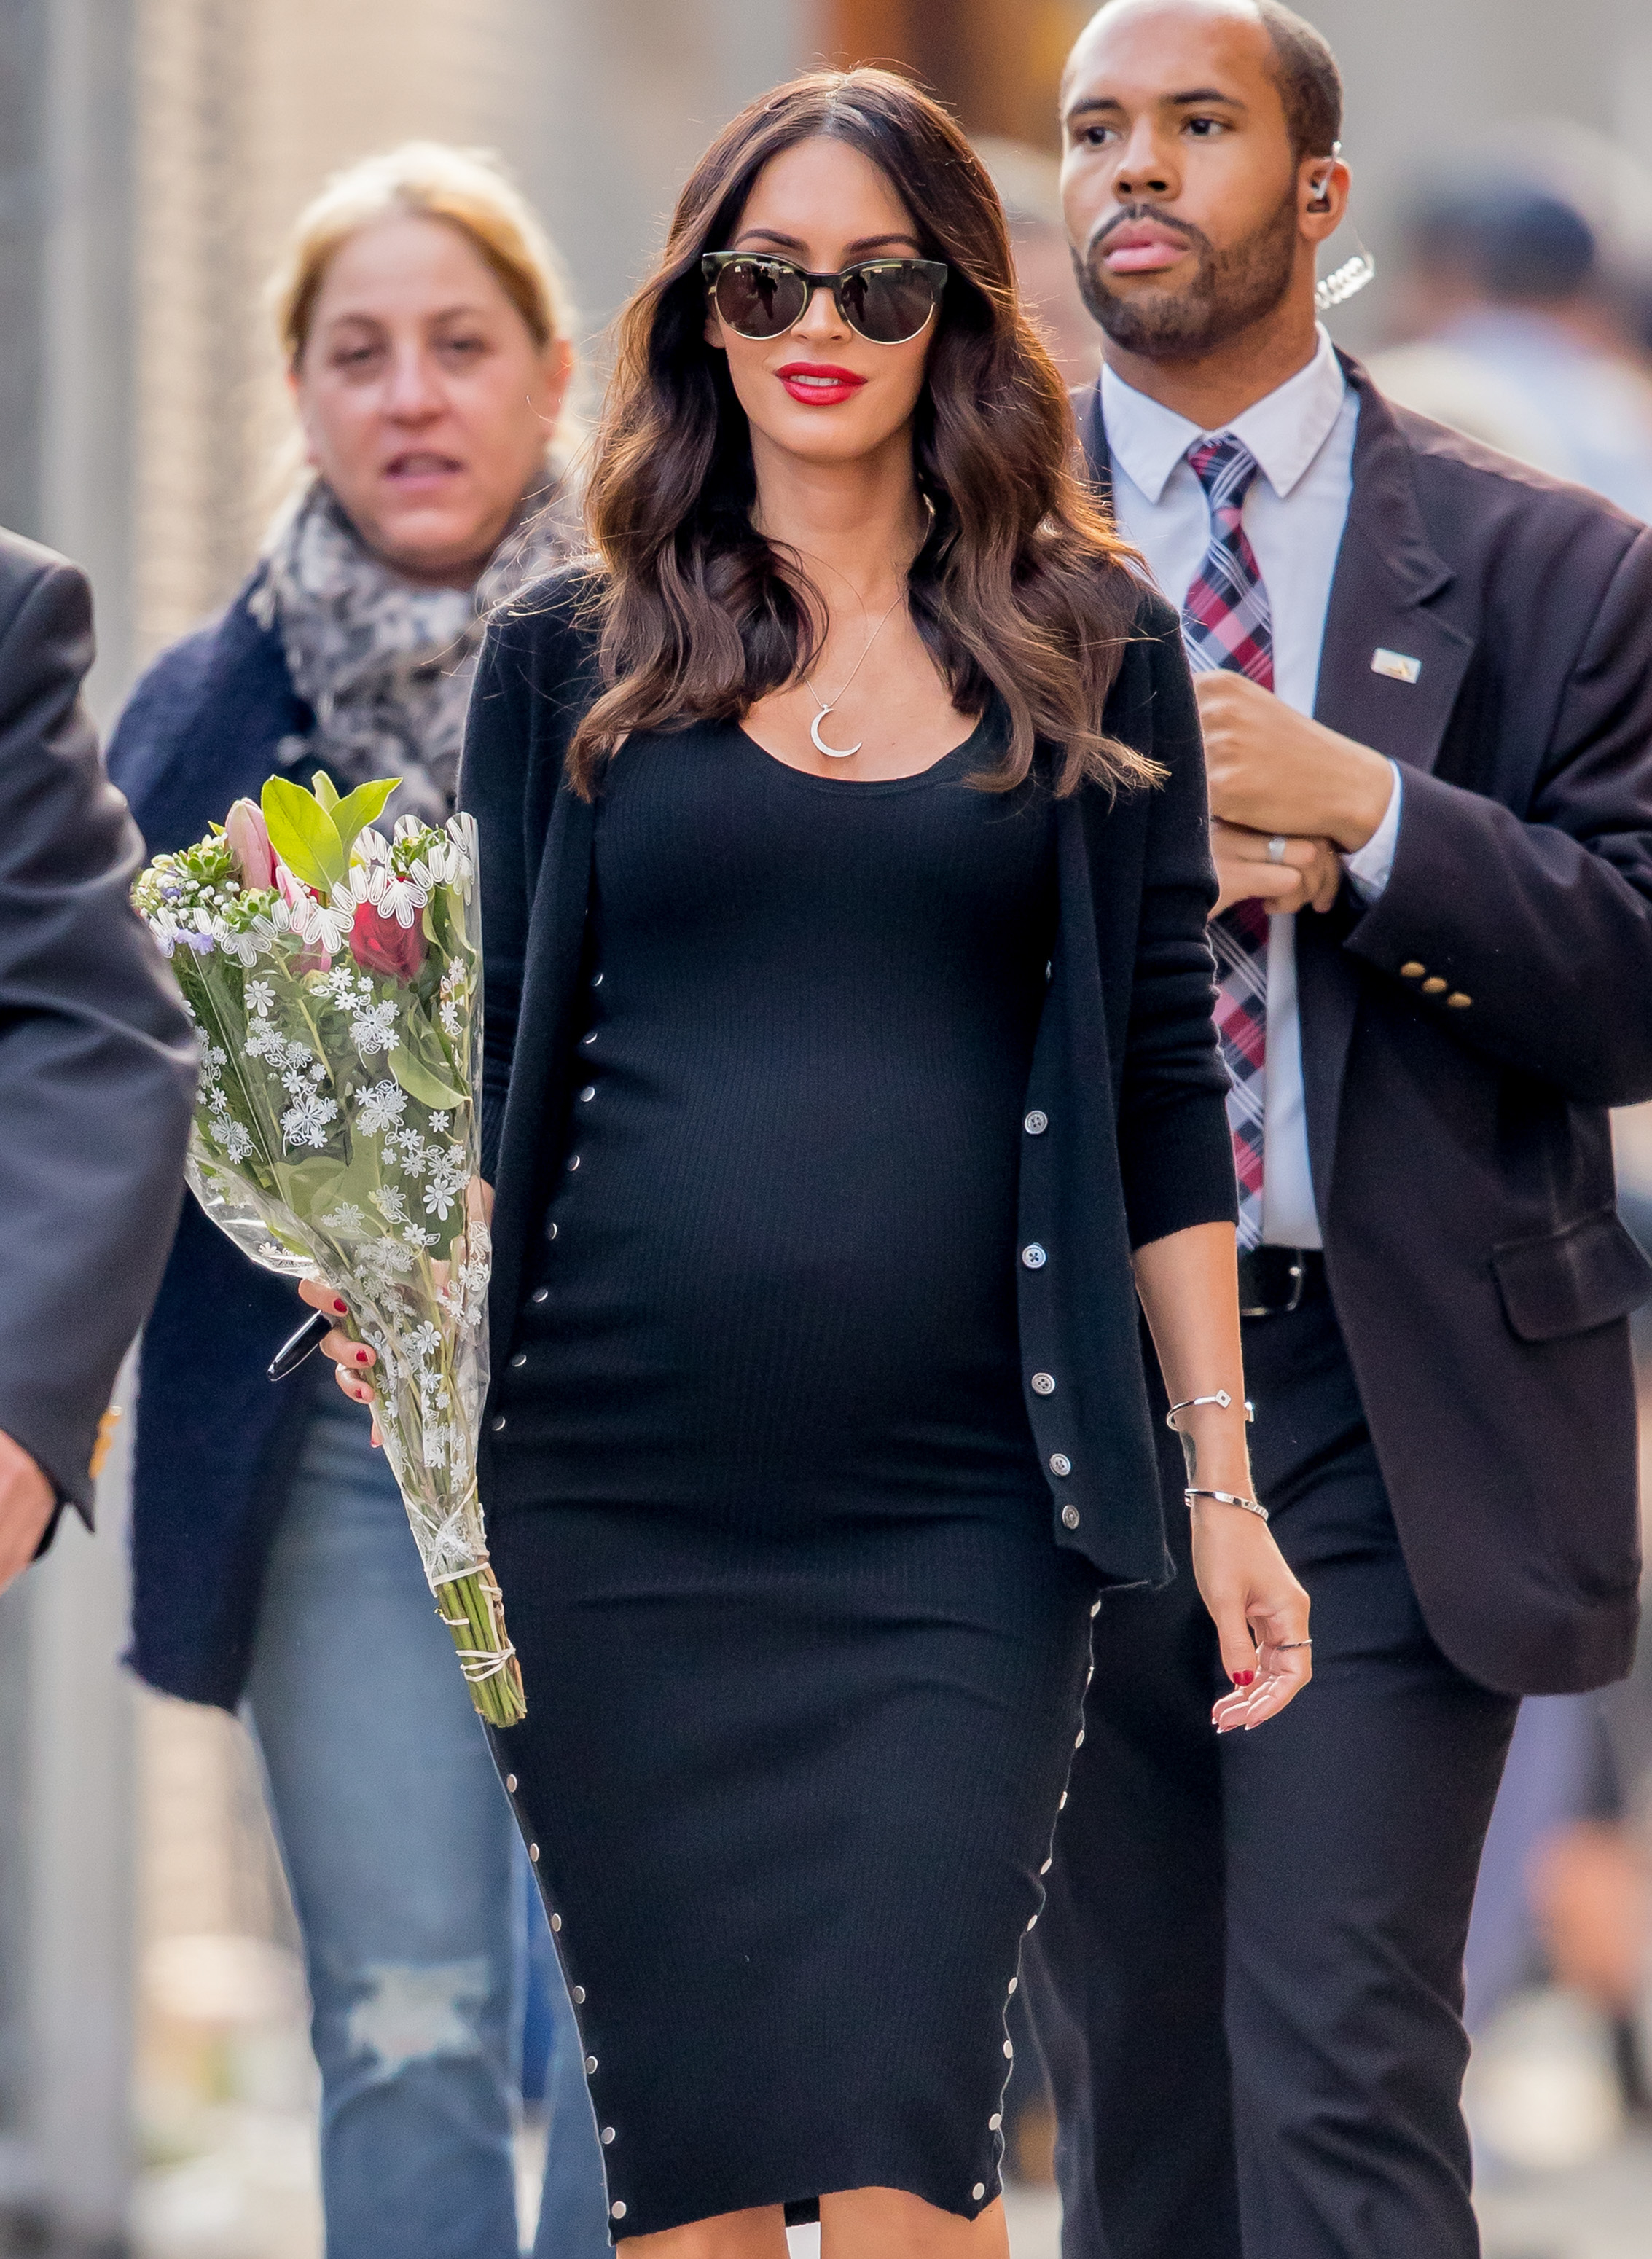 Pregnant Megan Fox in a snug black dress with a cardigan, holding flowers, flanked by security personnel